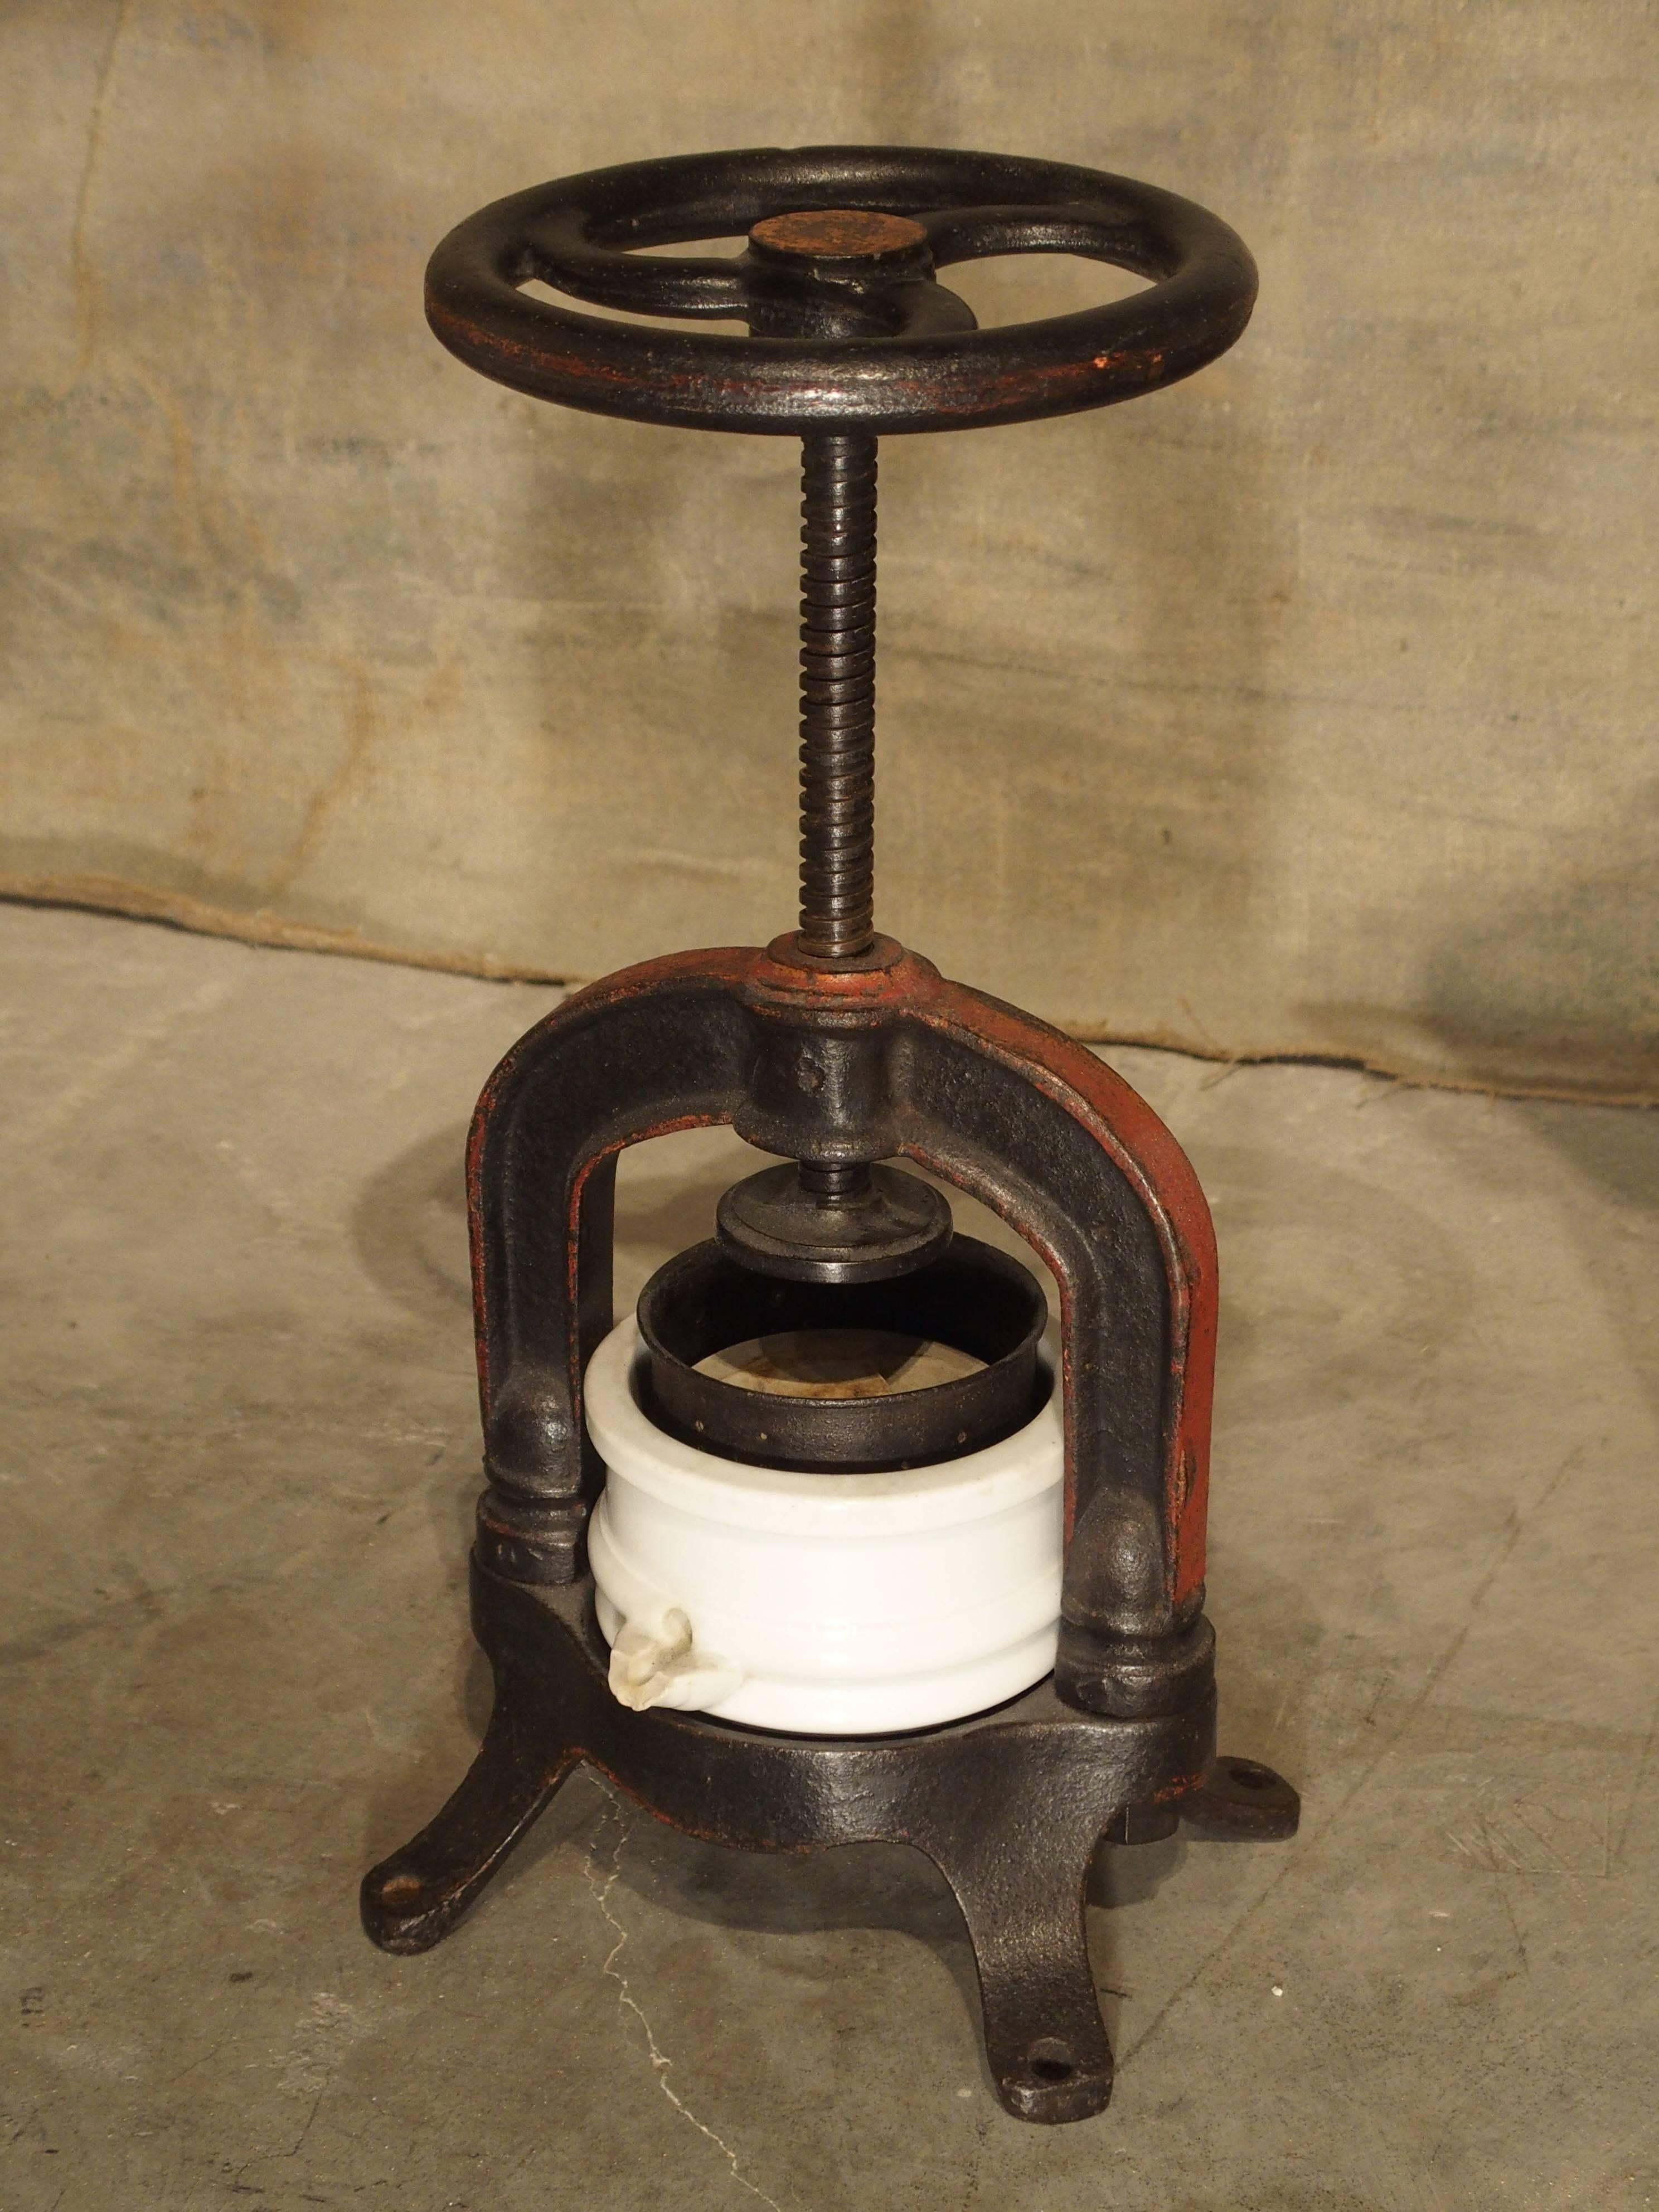 This small press dates to the beginning of the 1900s, but they first appeared in the 1800s. It is made of cast iron (partial old paint remains), a ceramic juice container and its original strainer. Each leg would have been bolted to a table to keep